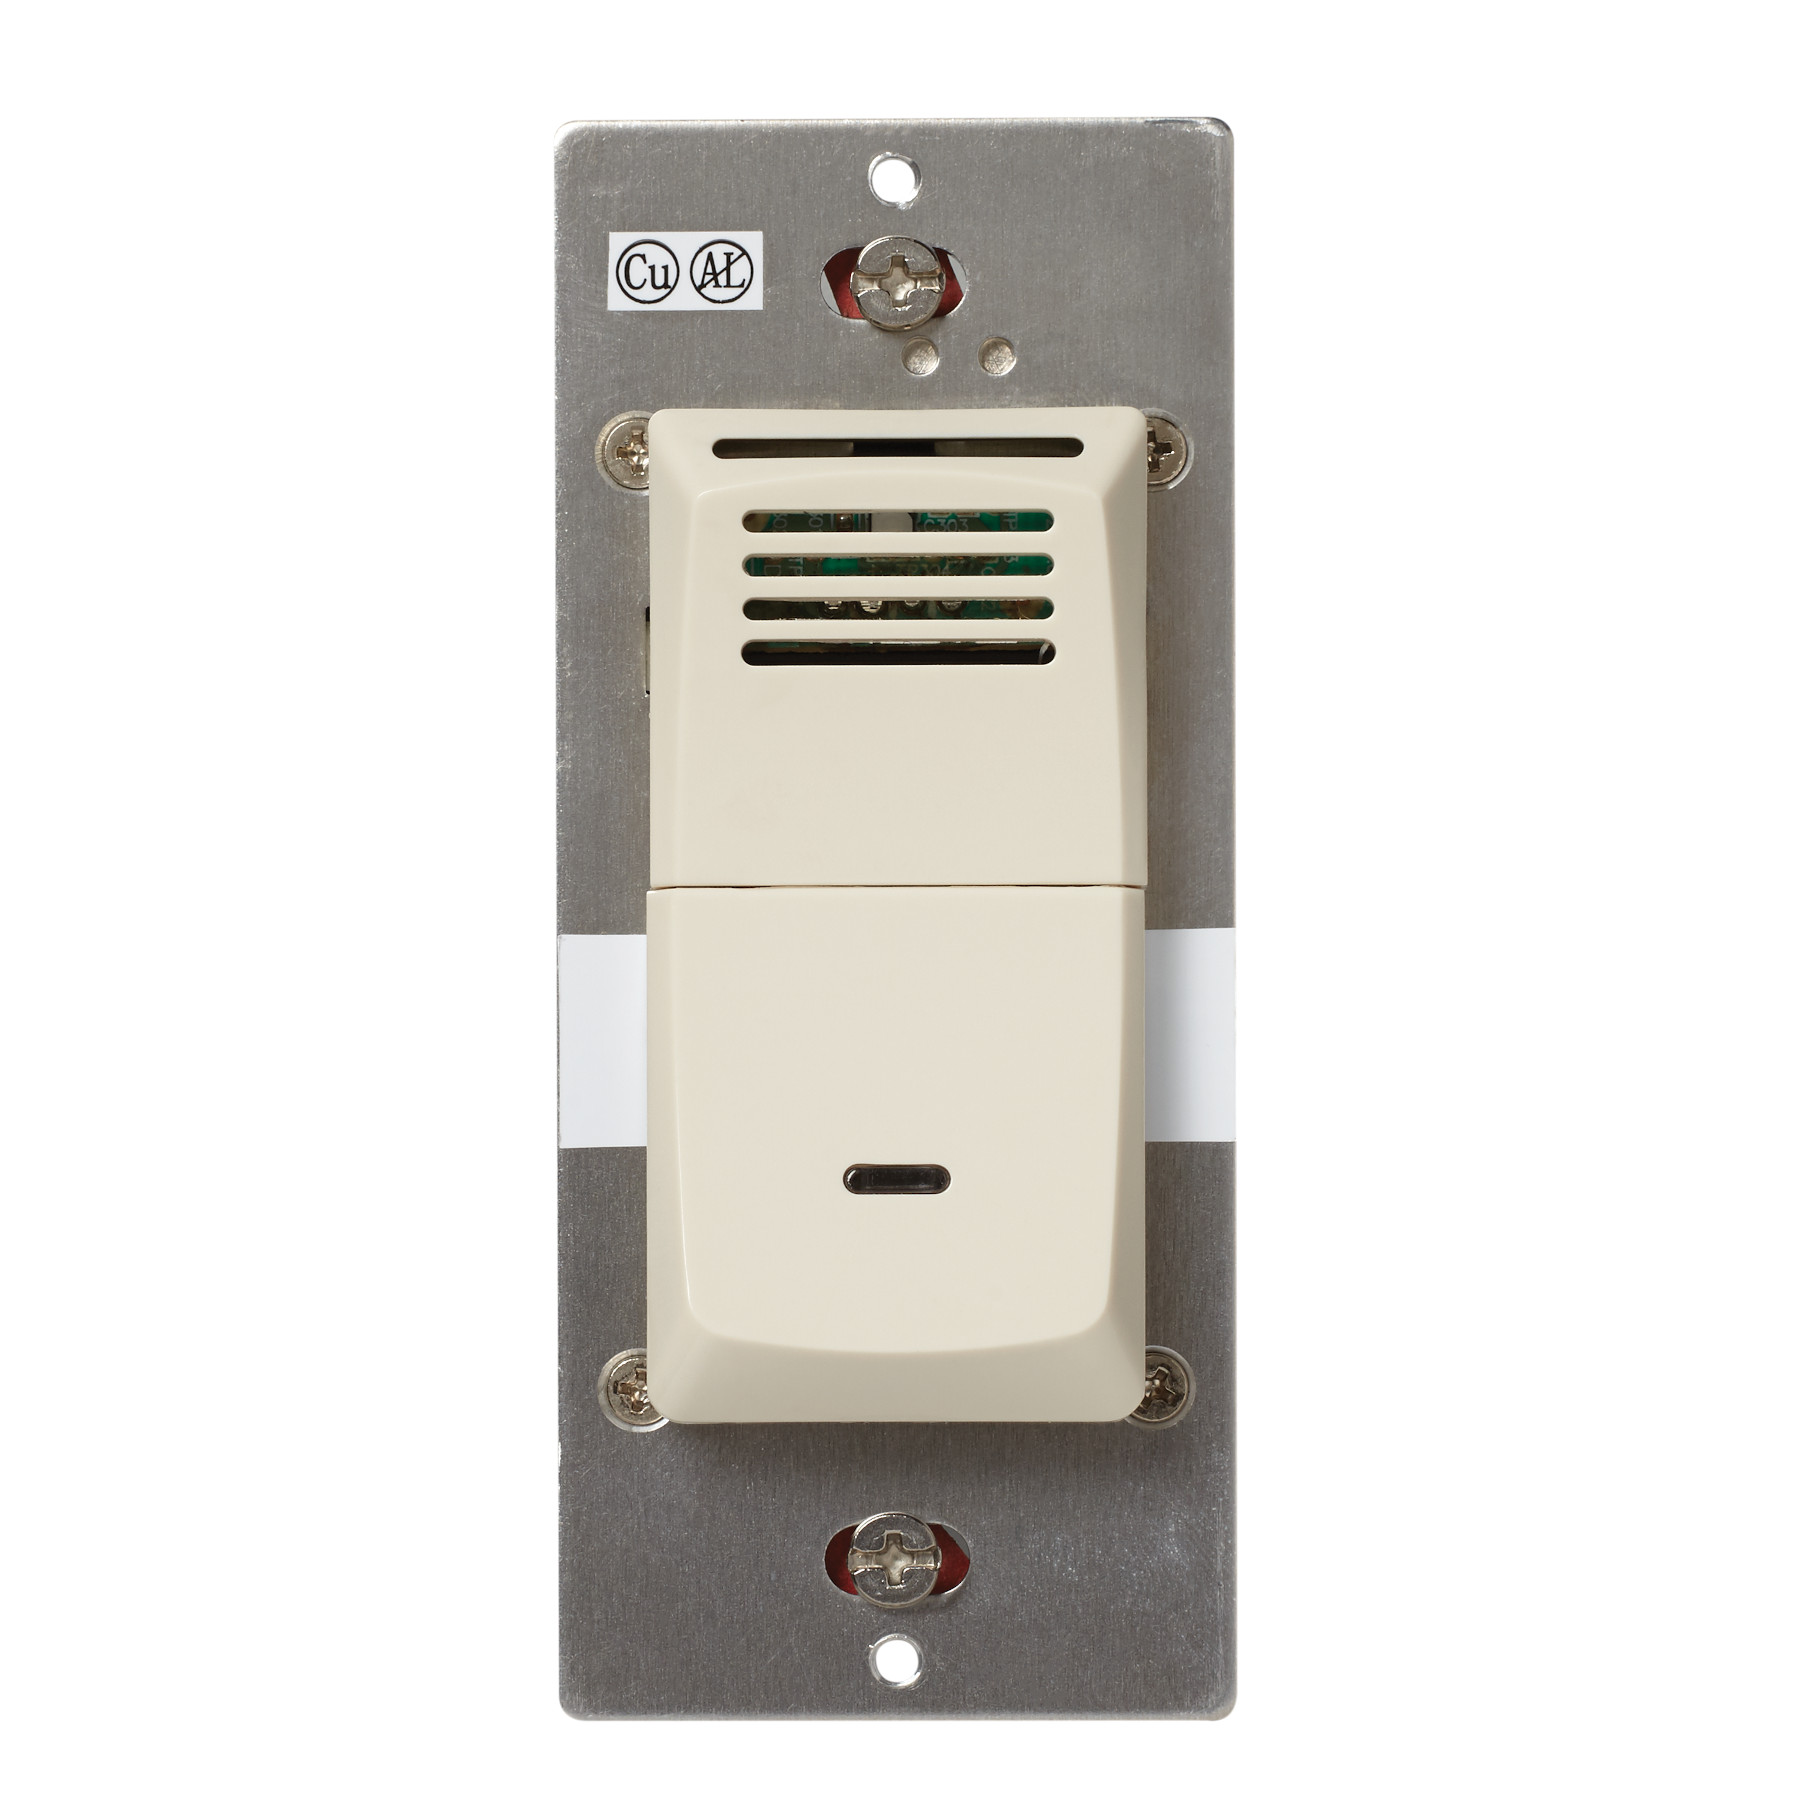 **DISCONTINUED** Broan-NuTone® Sensaire™ Humidity Sensing Wall Control, Almond, Single Pack